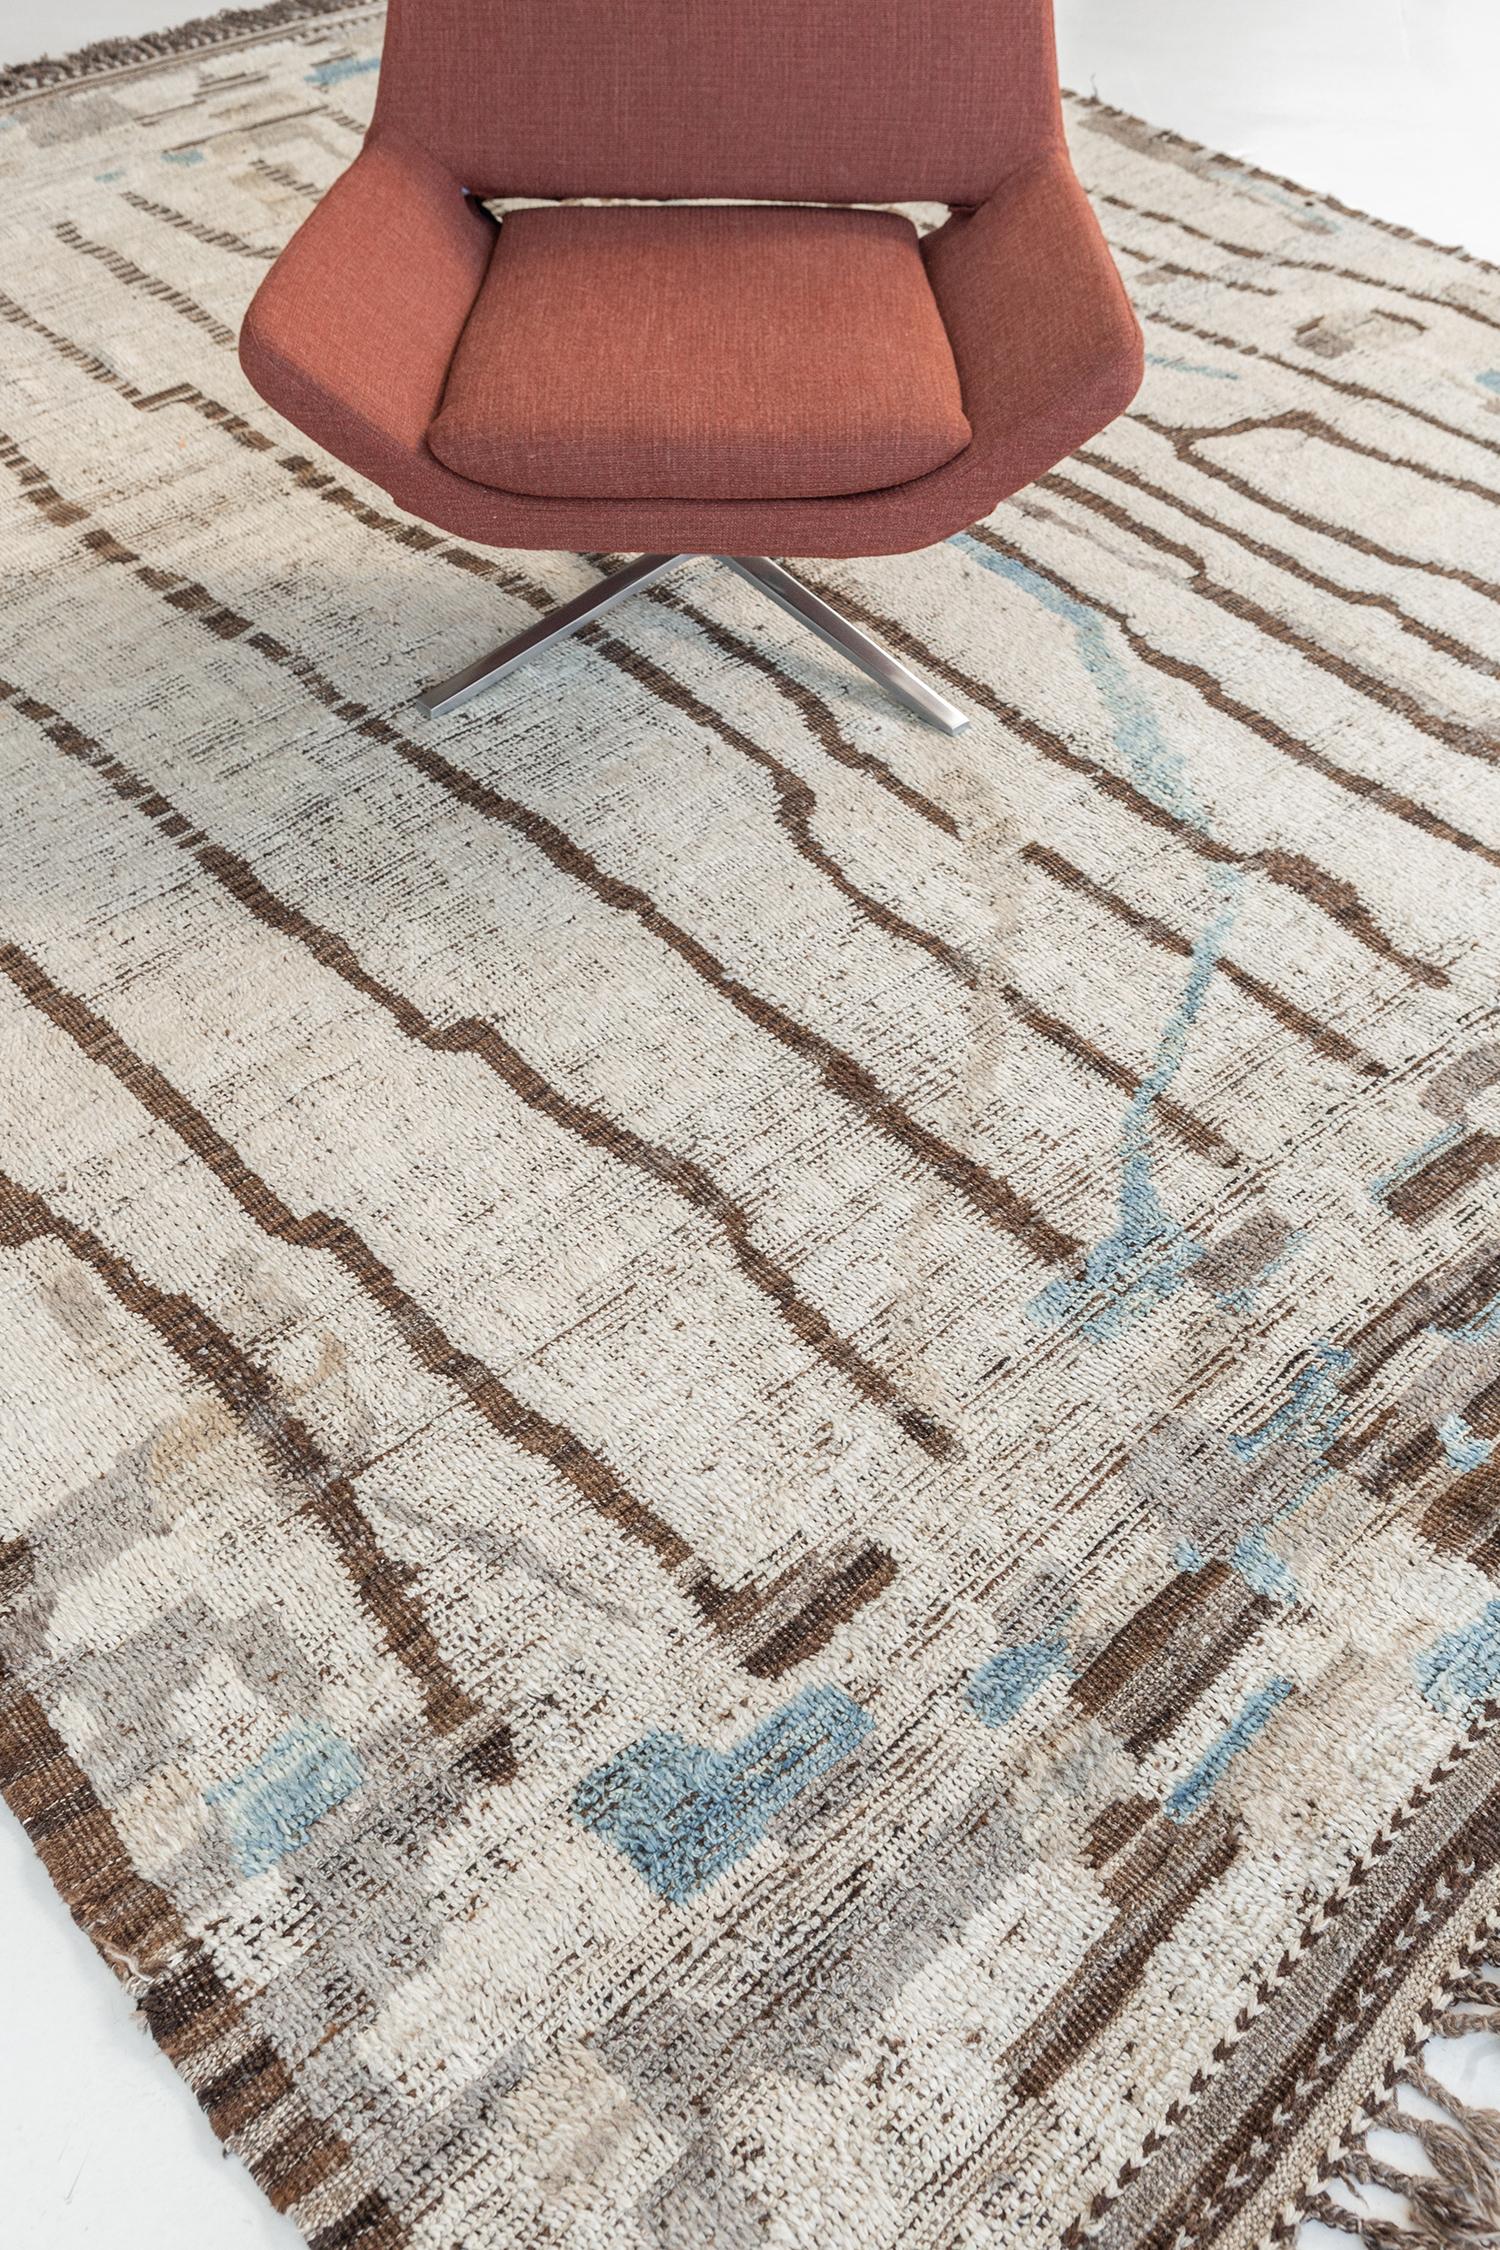 Berberis is an interplay between neutral tones and soothing muted colors into a modern-day interpretation of the Moroccan world. This rug's play of textures, linework, and unique shapes is what makes the Atlas collection so unique and sought after.